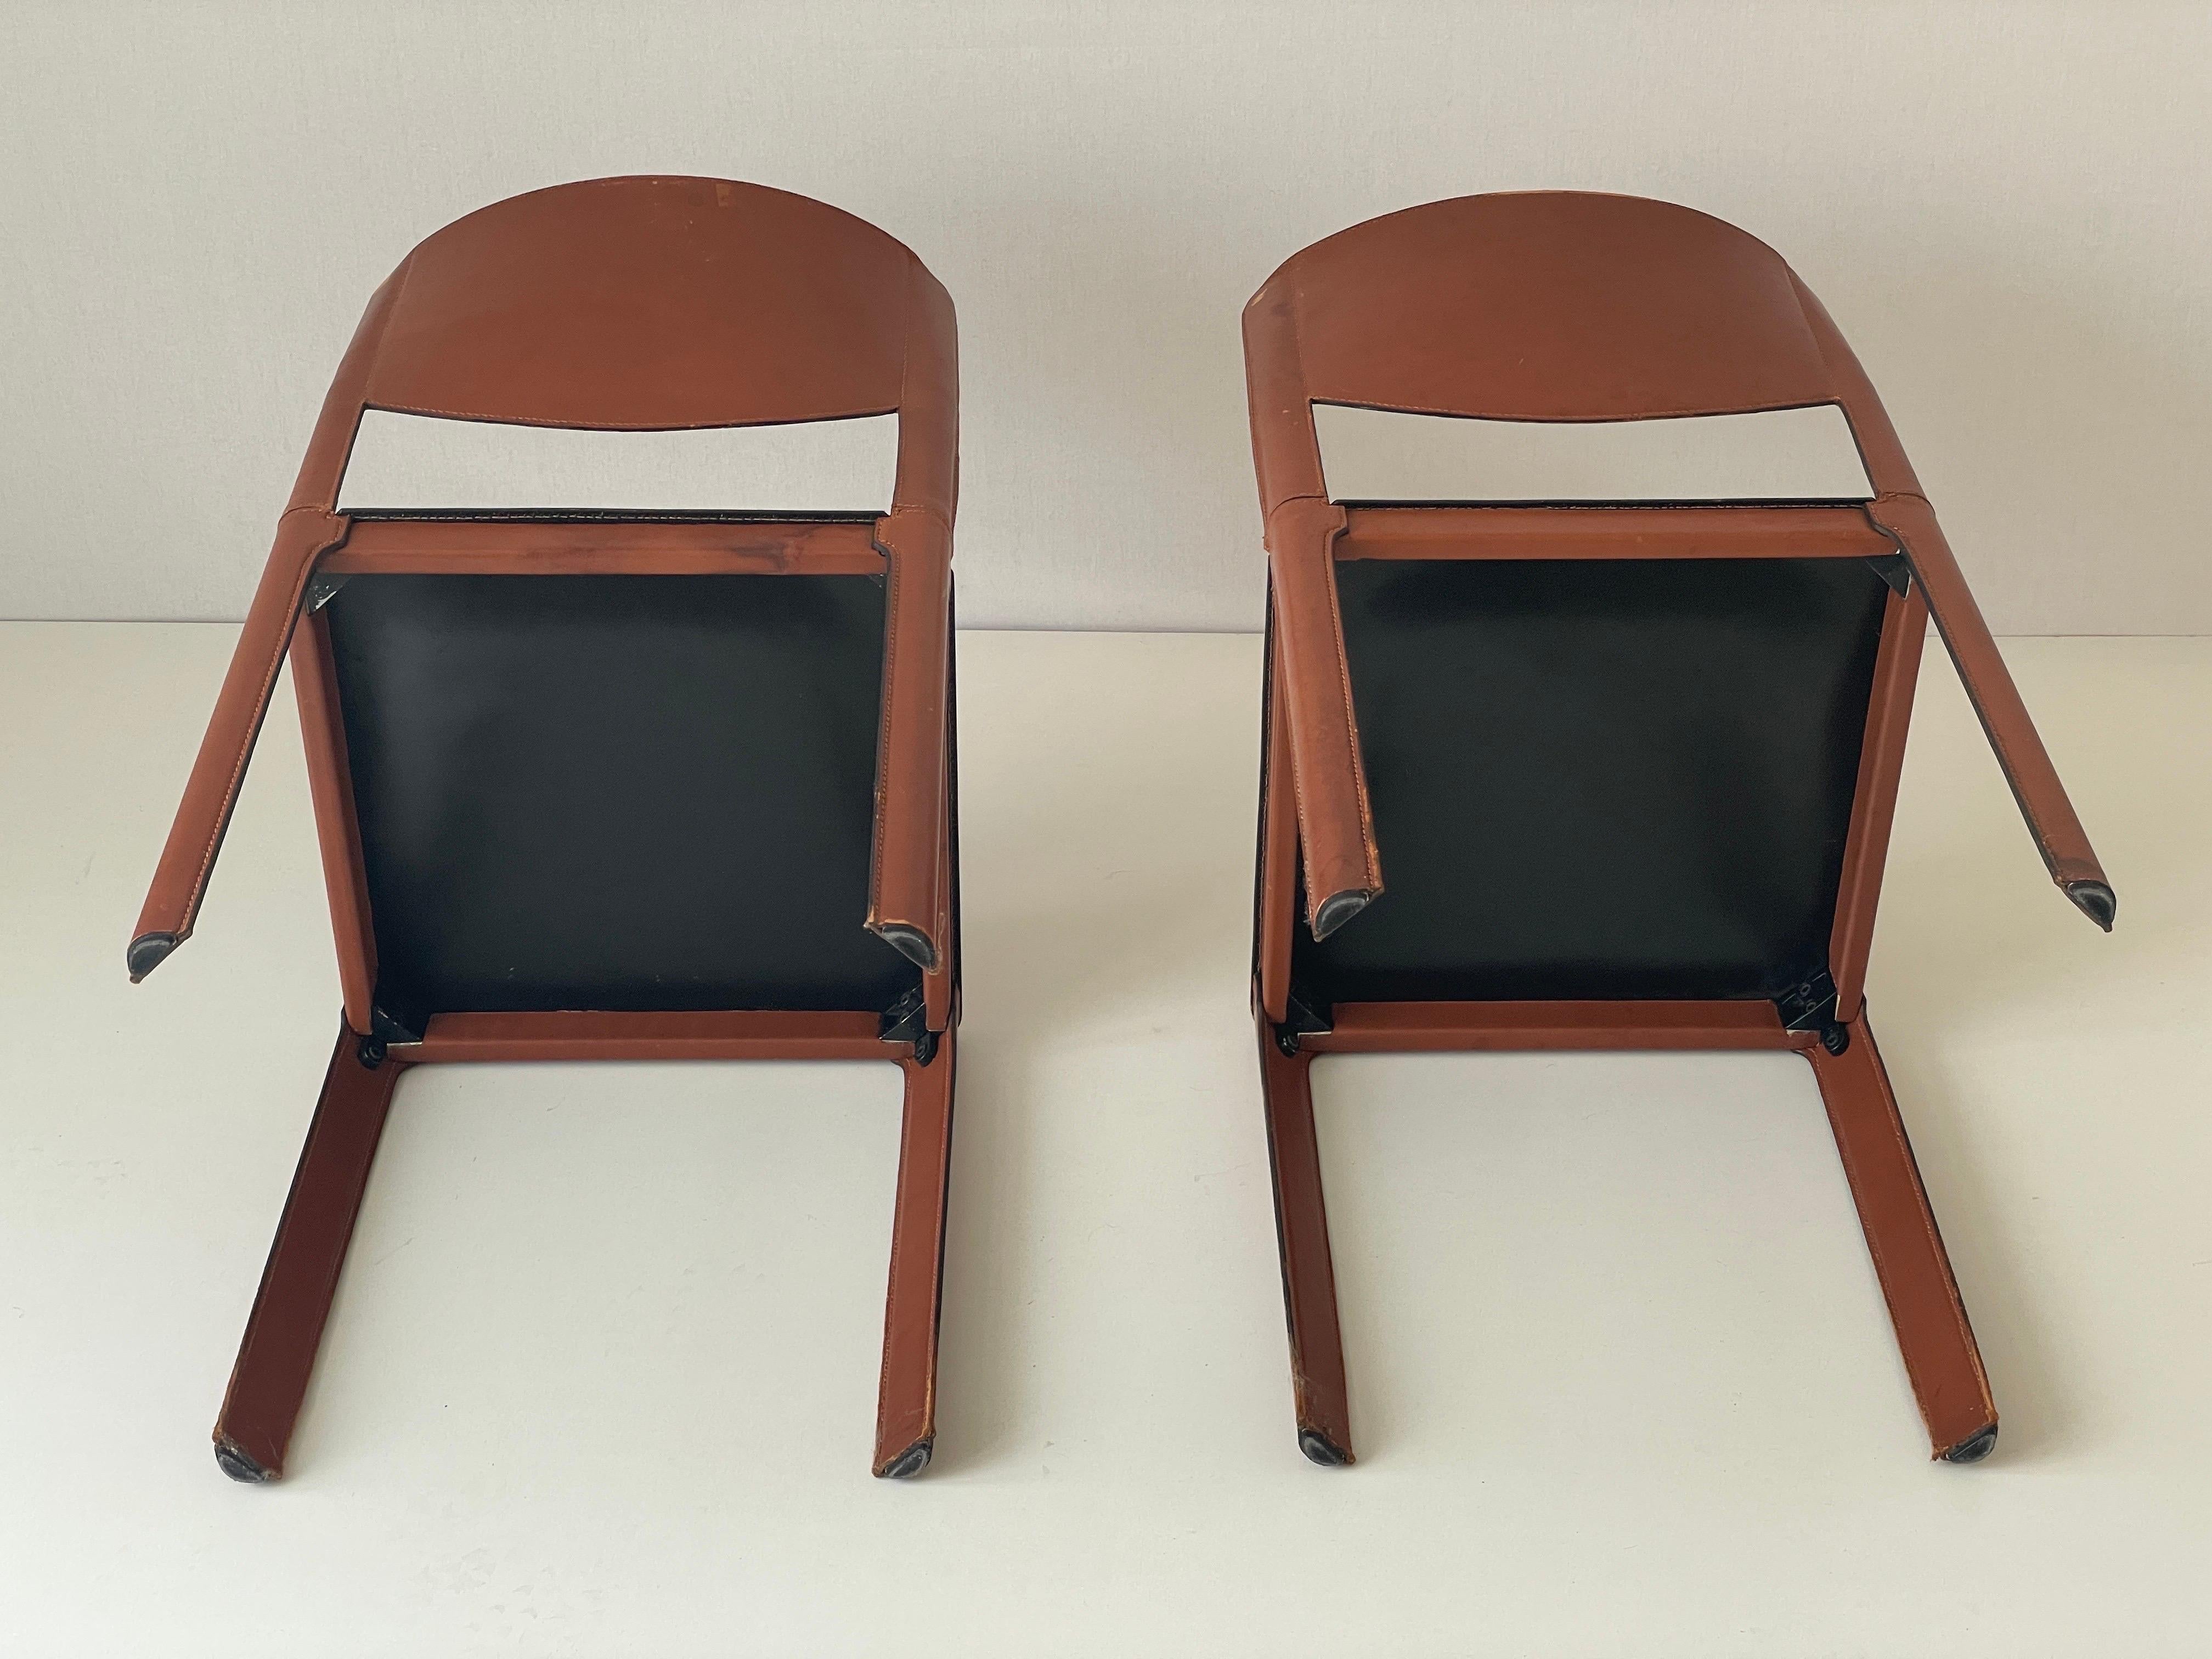 Pair of Italian Brown Leather Chairs by Matteo Grassi, 1970s, Italy For Sale 10